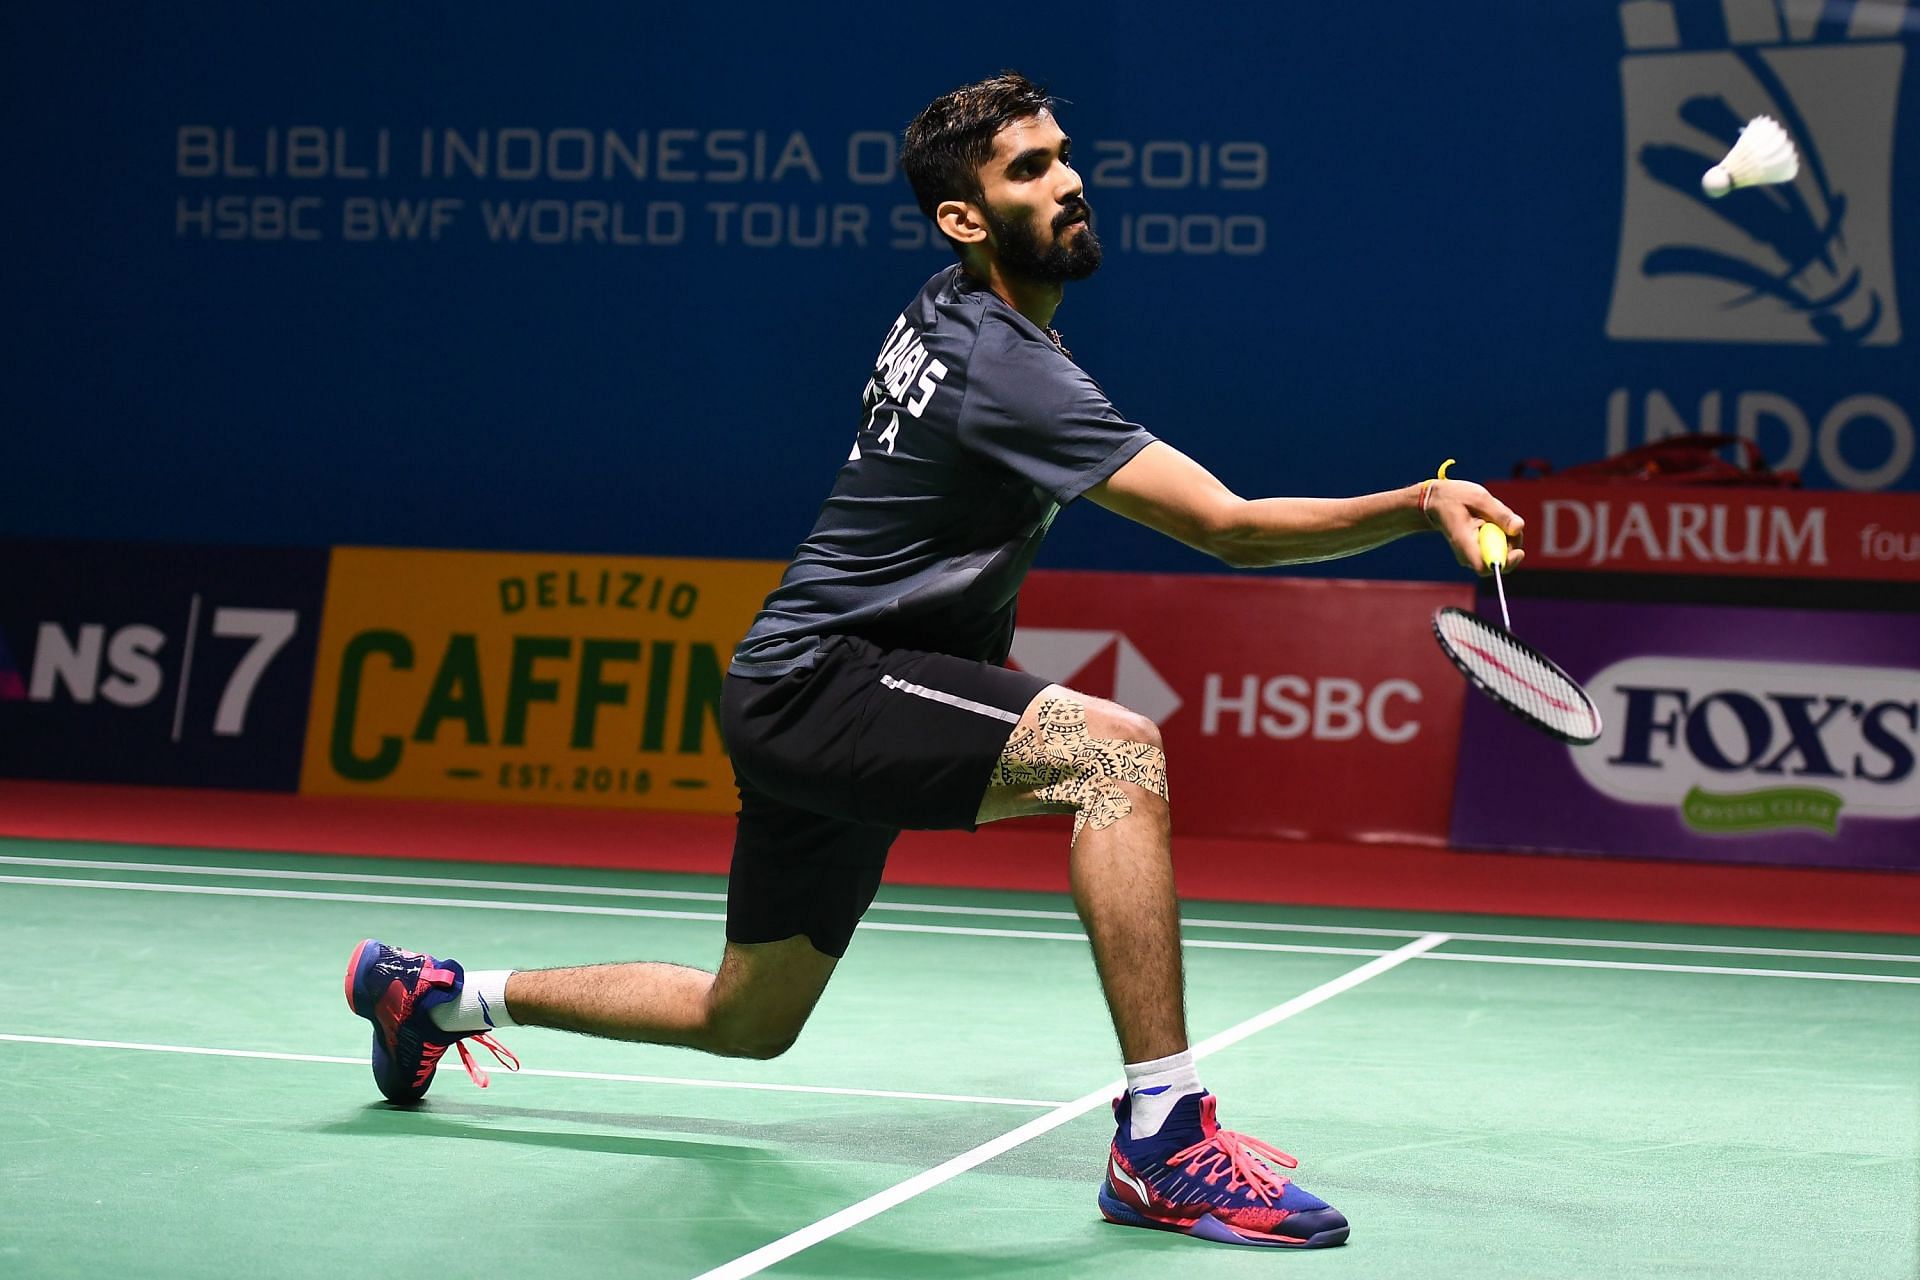 Indonesia Open 2021, Kidambi Srikanth vs HS Prannoy Where to watch, TV schedule, live stream details, and more